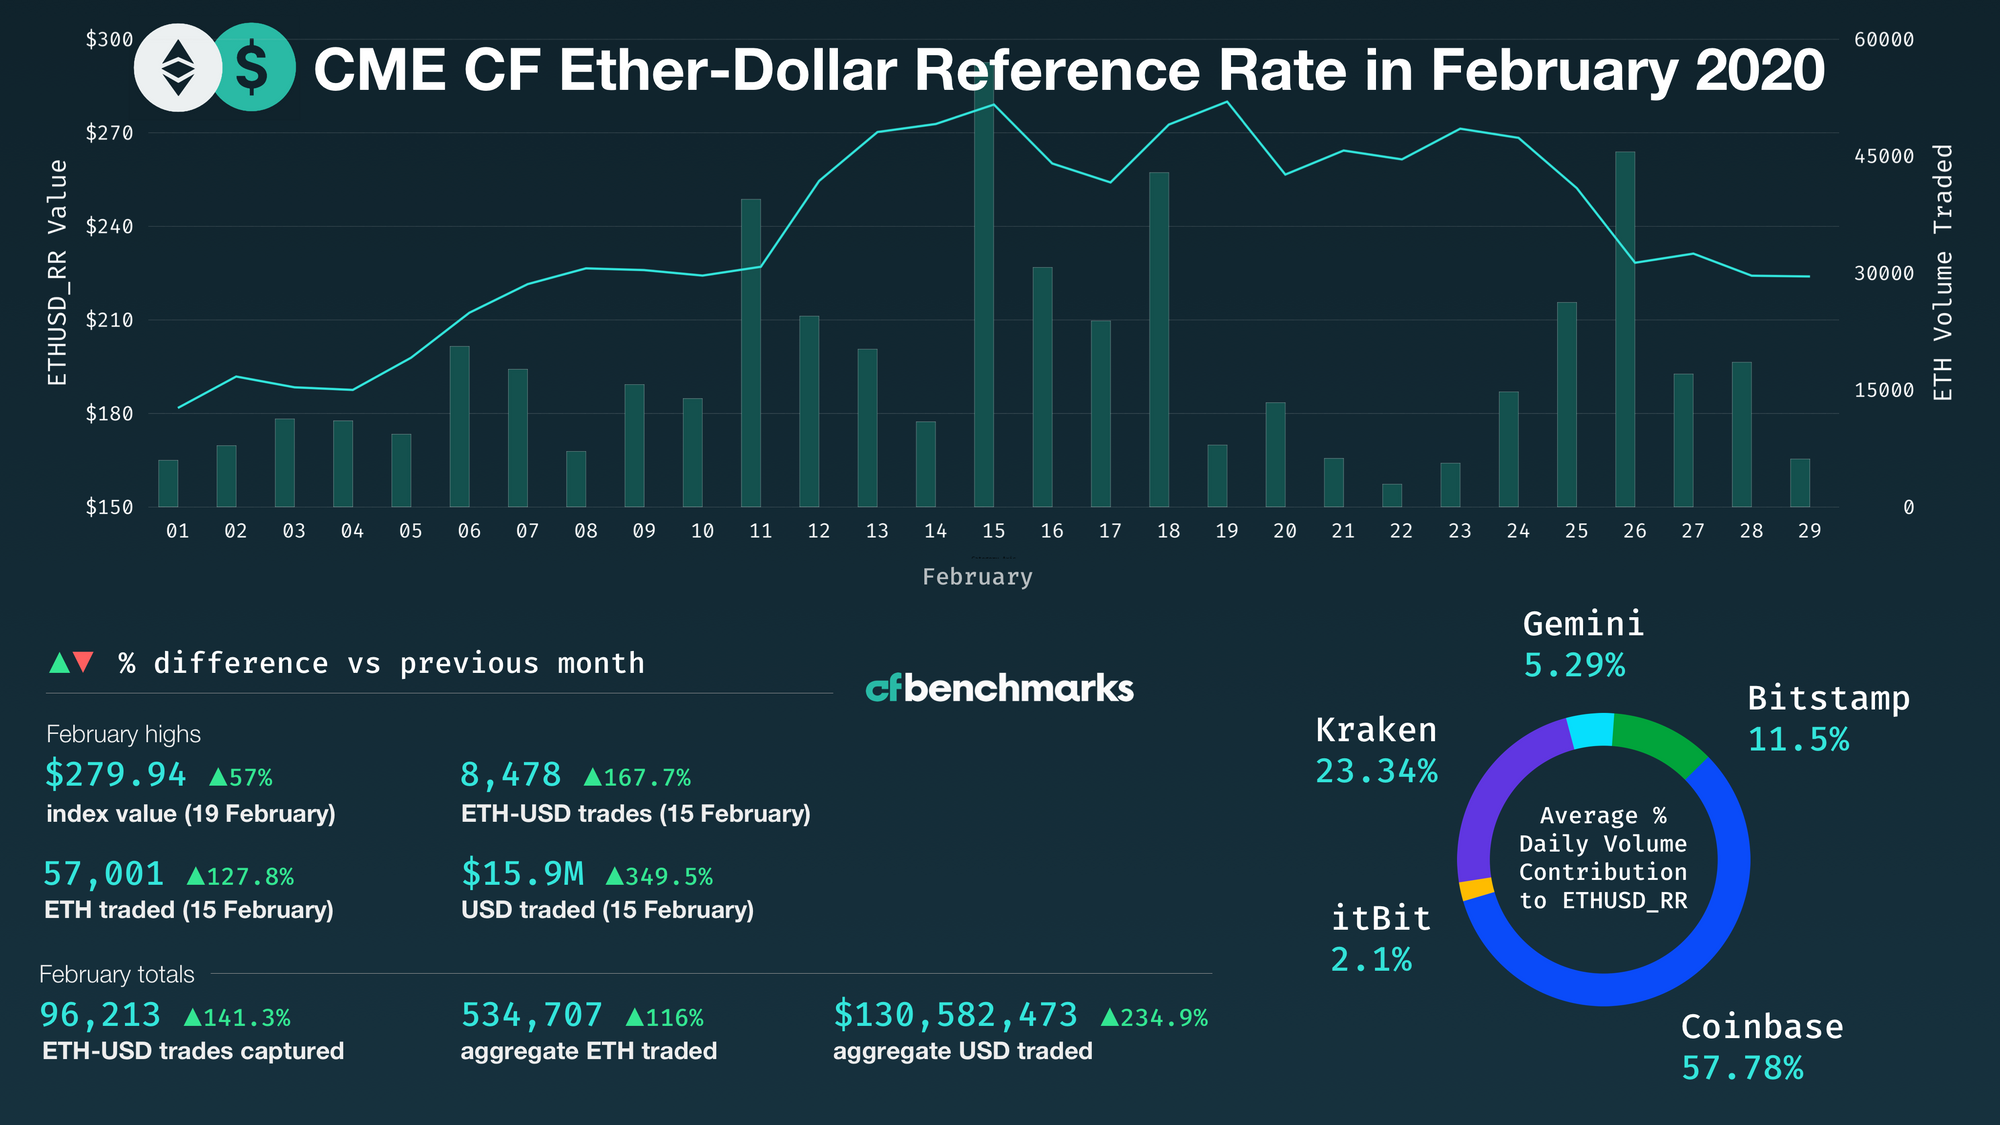 Ether-Dollar Reference Rate posts 23.2% return in Feb'20 amidst record breaking volumes